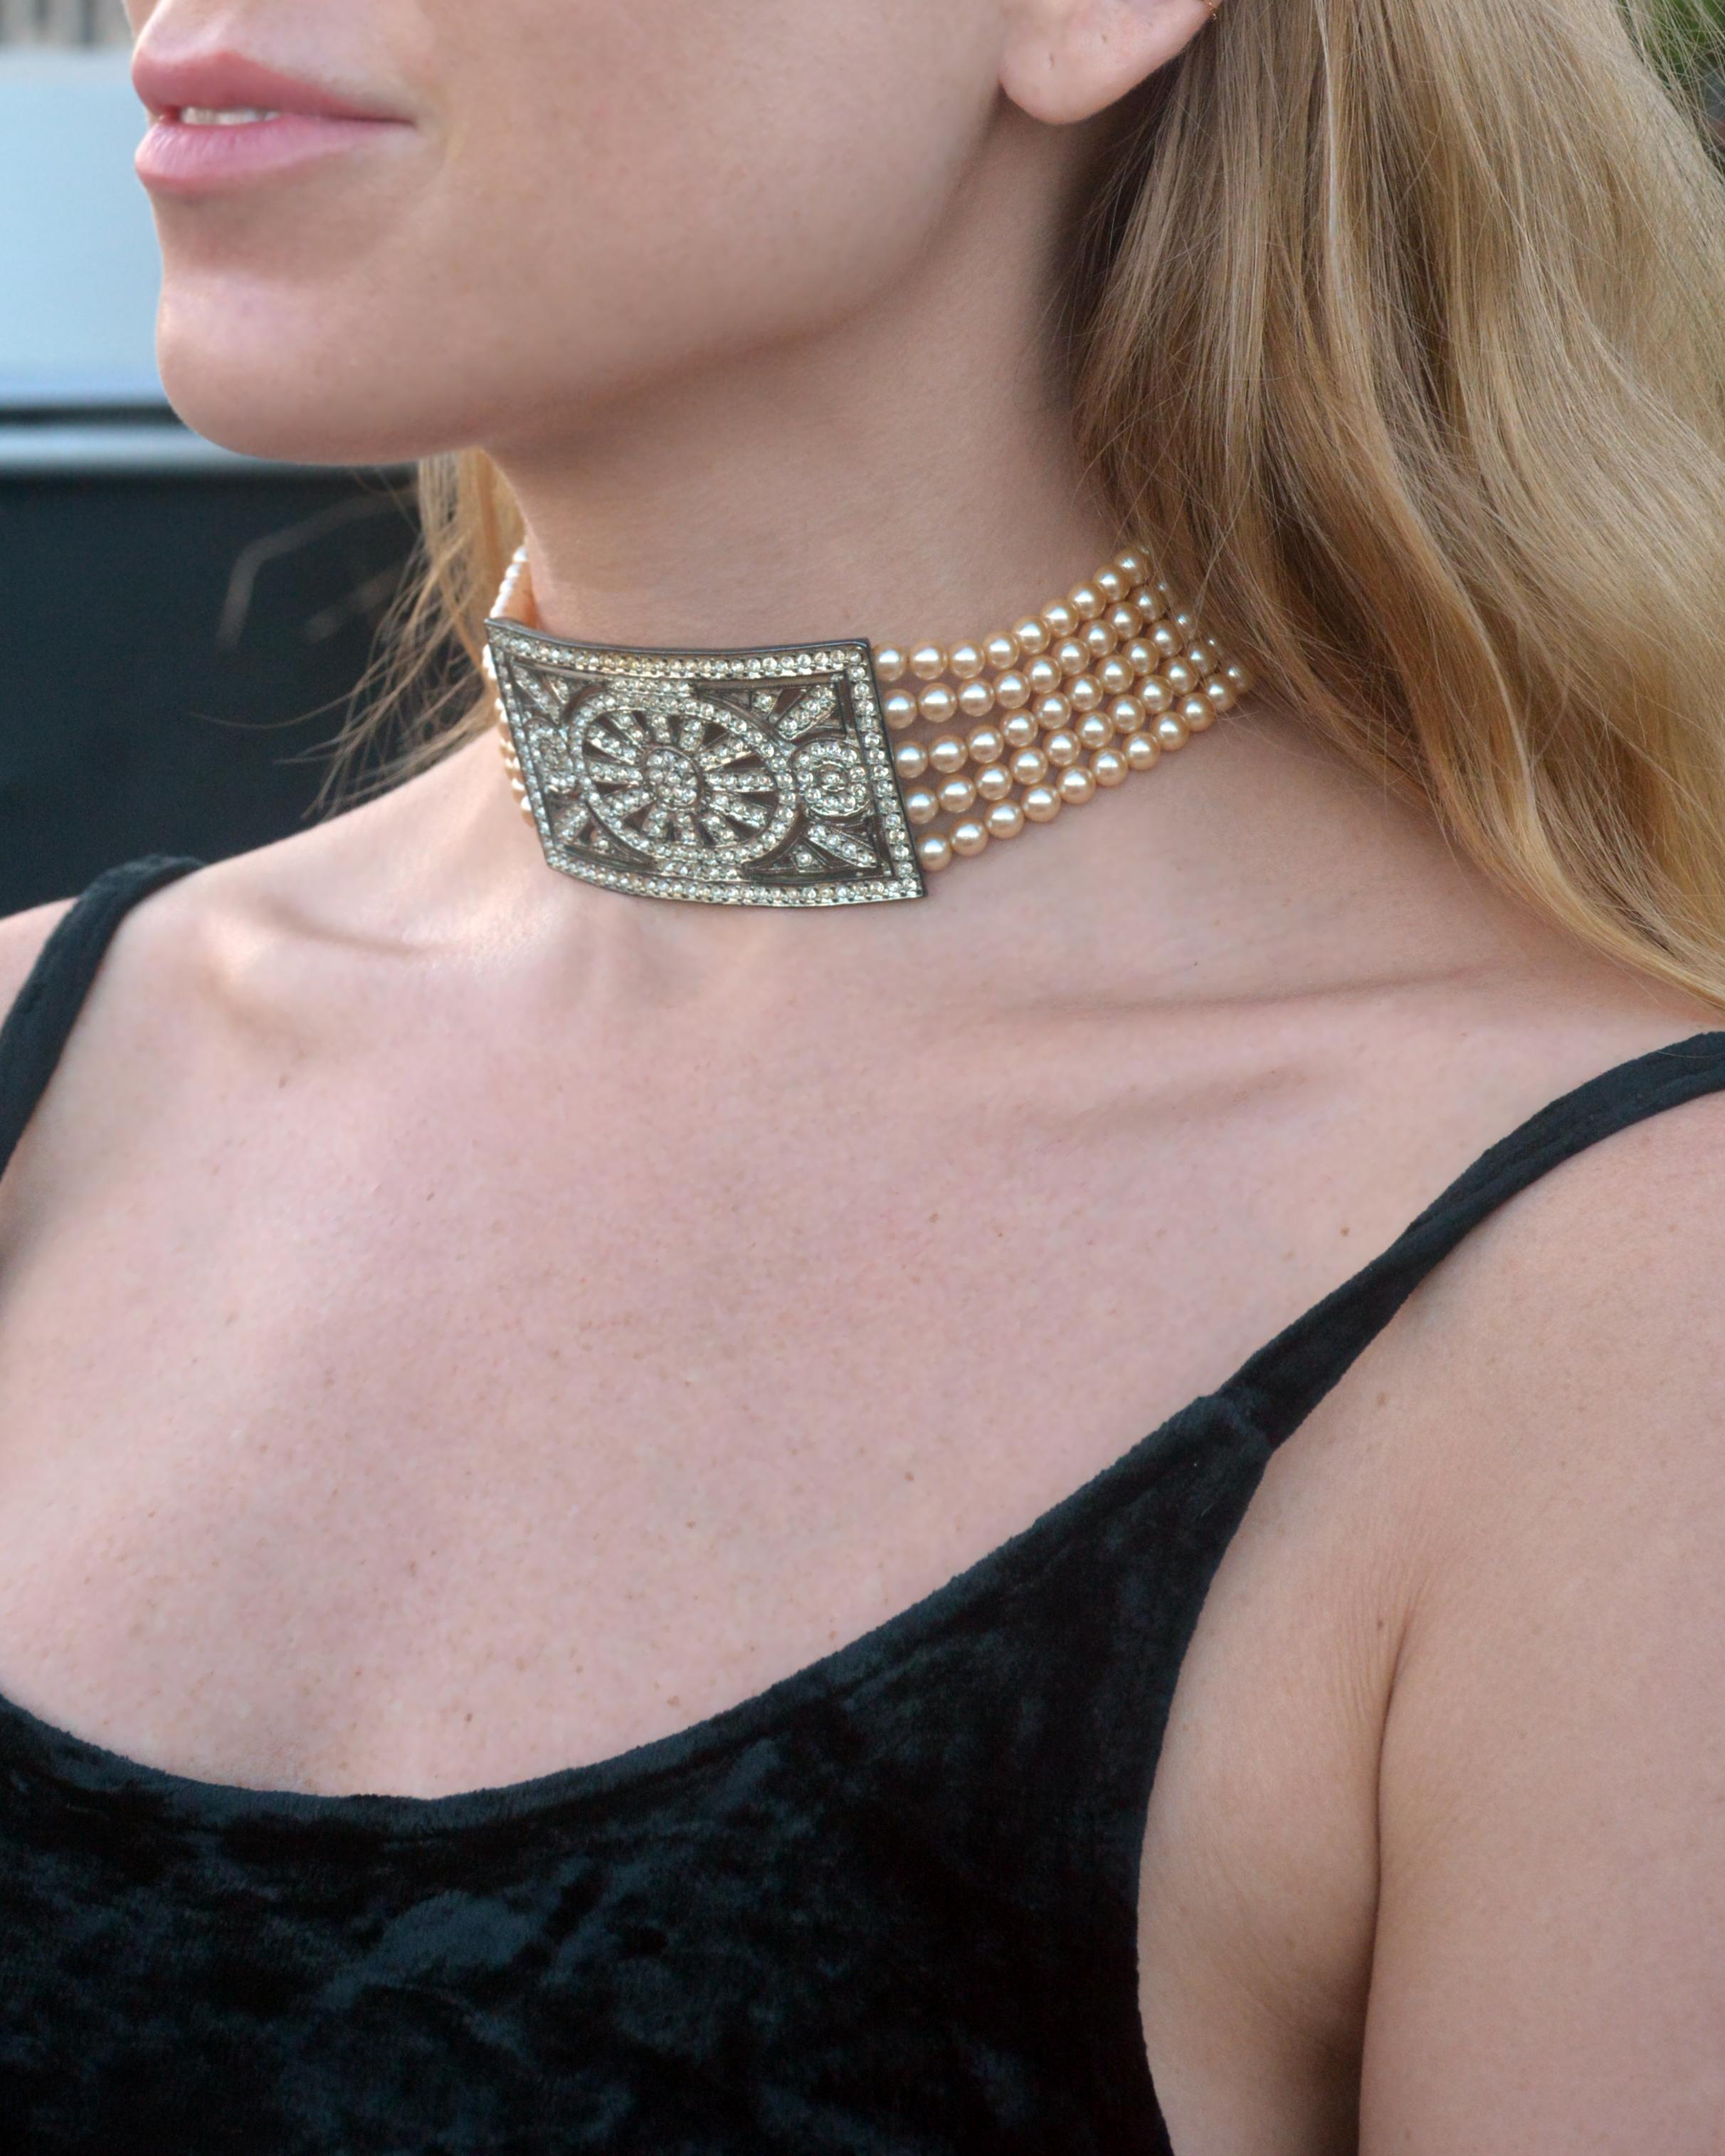 This vintage pearl collar choker draws clear inspiration from antique collar choker styles popular in the Edwardian era. Its five strands of pearls center upon an ornate crystal centerpiece, set in metal with an antique 